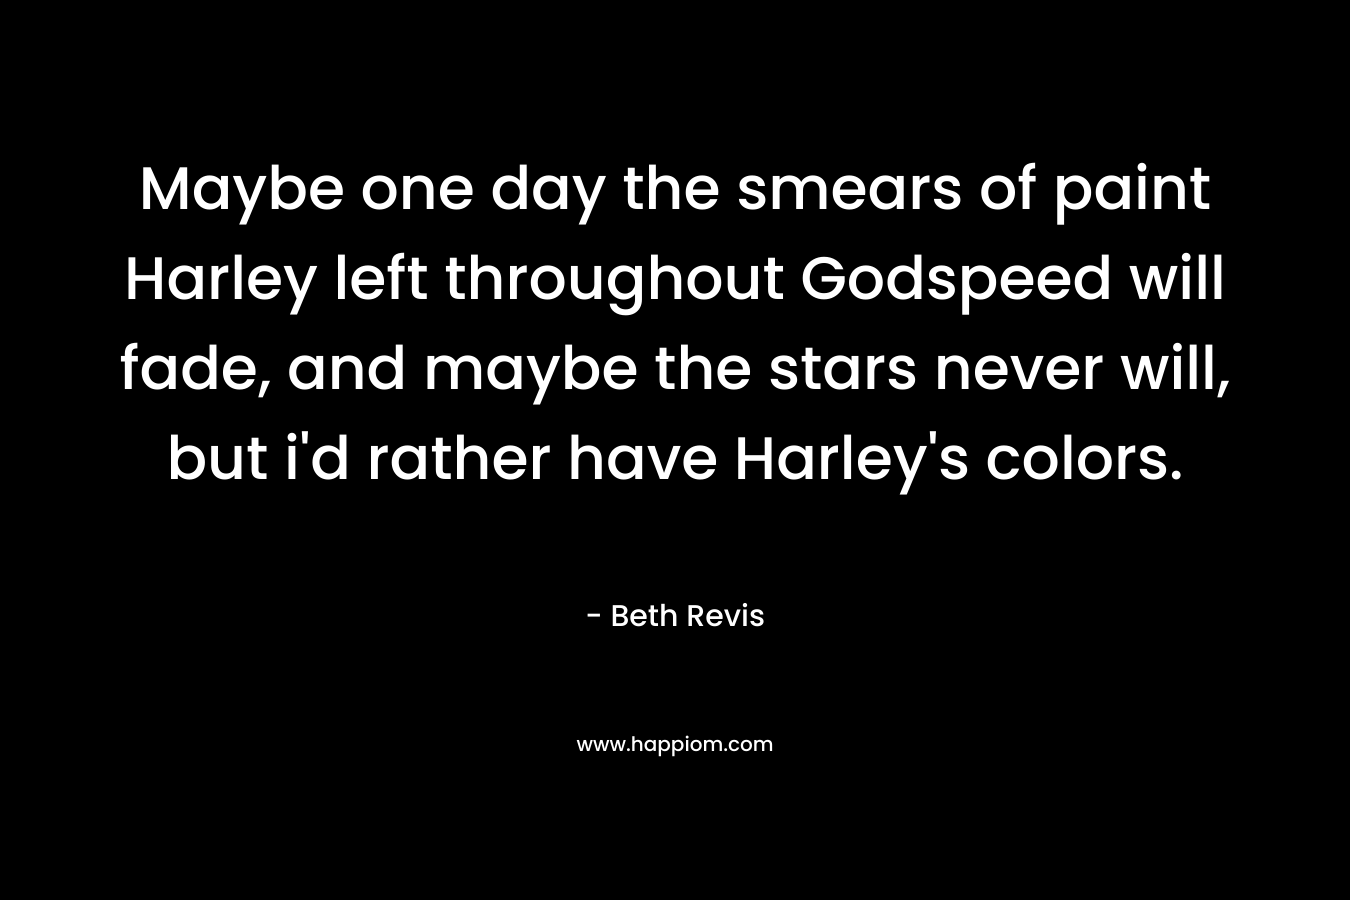 Maybe one day the smears of paint Harley left throughout Godspeed will fade, and maybe the stars never will, but i’d rather have Harley’s colors. – Beth Revis